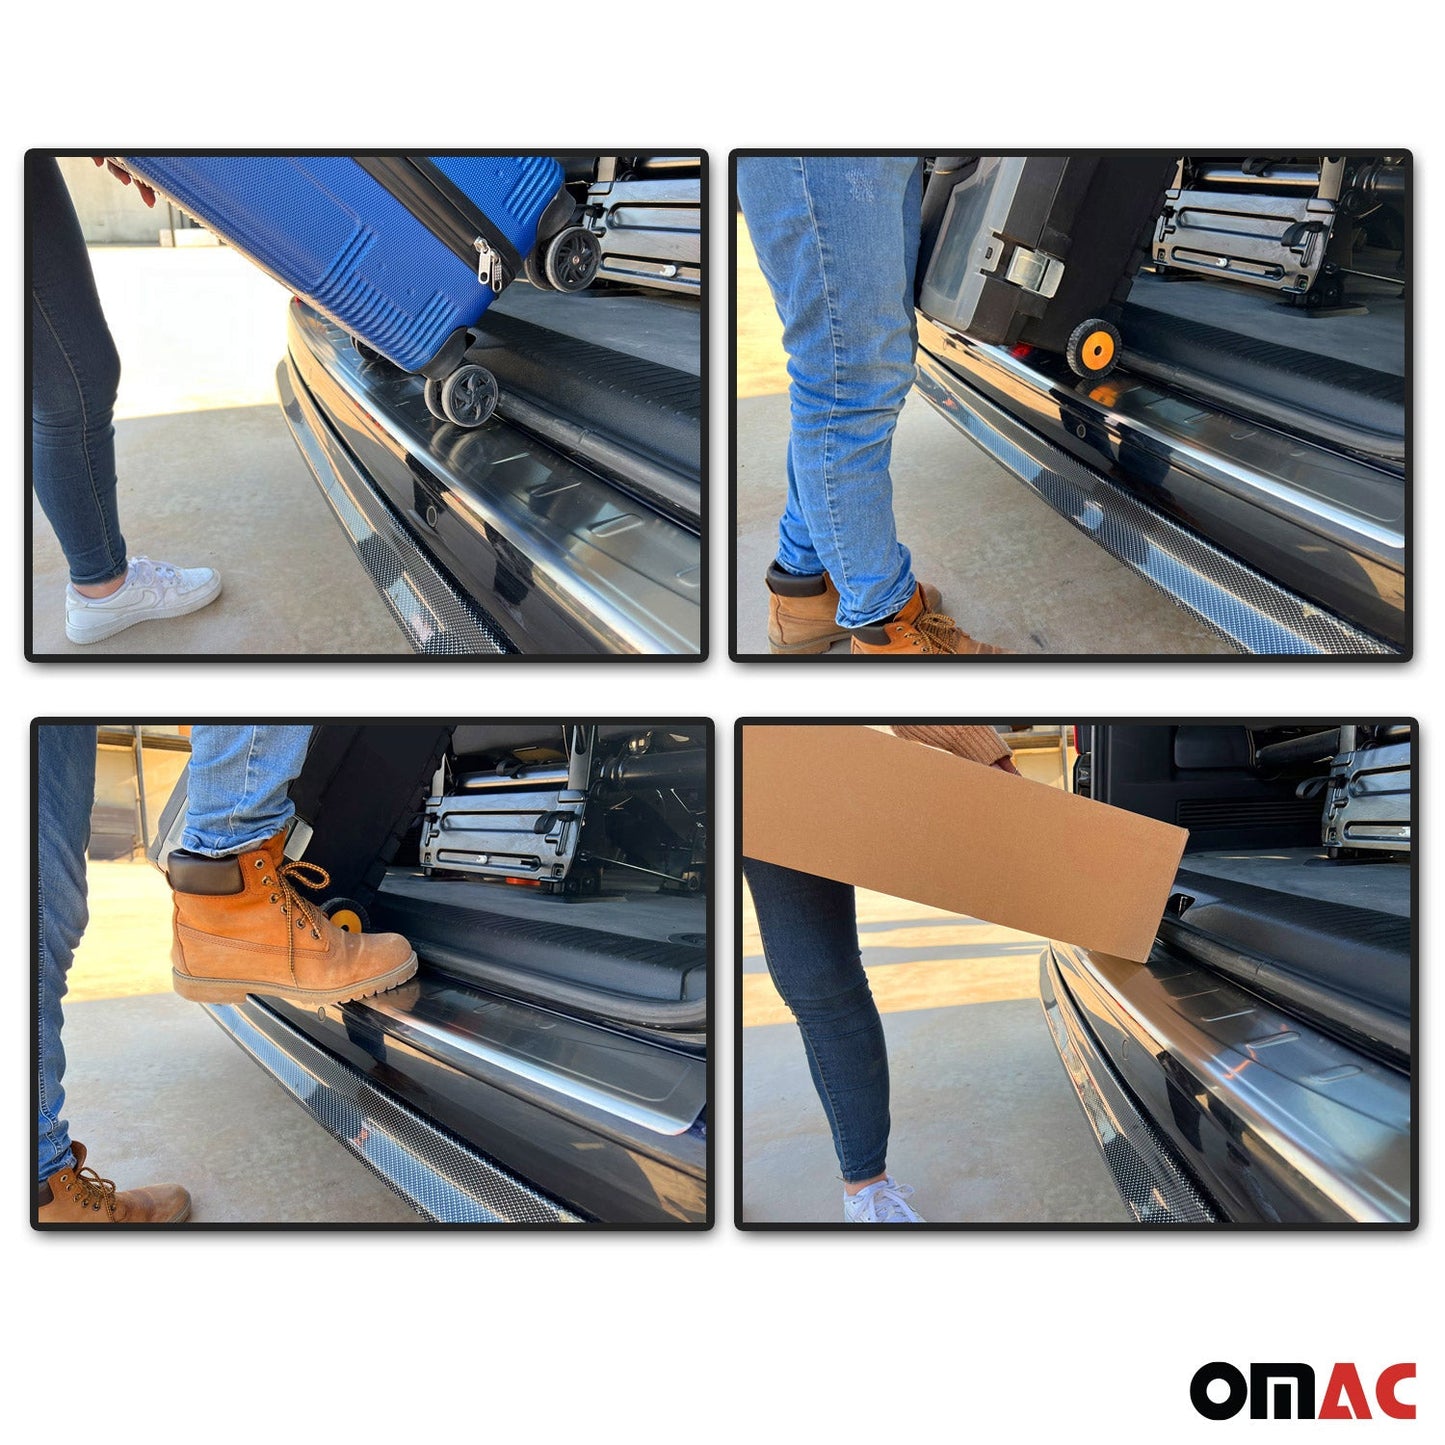 OMAC Rear Bumper Sill Cover Protector Guard for VW Passat B6 2006-2010 Brushed Steel 7505095T